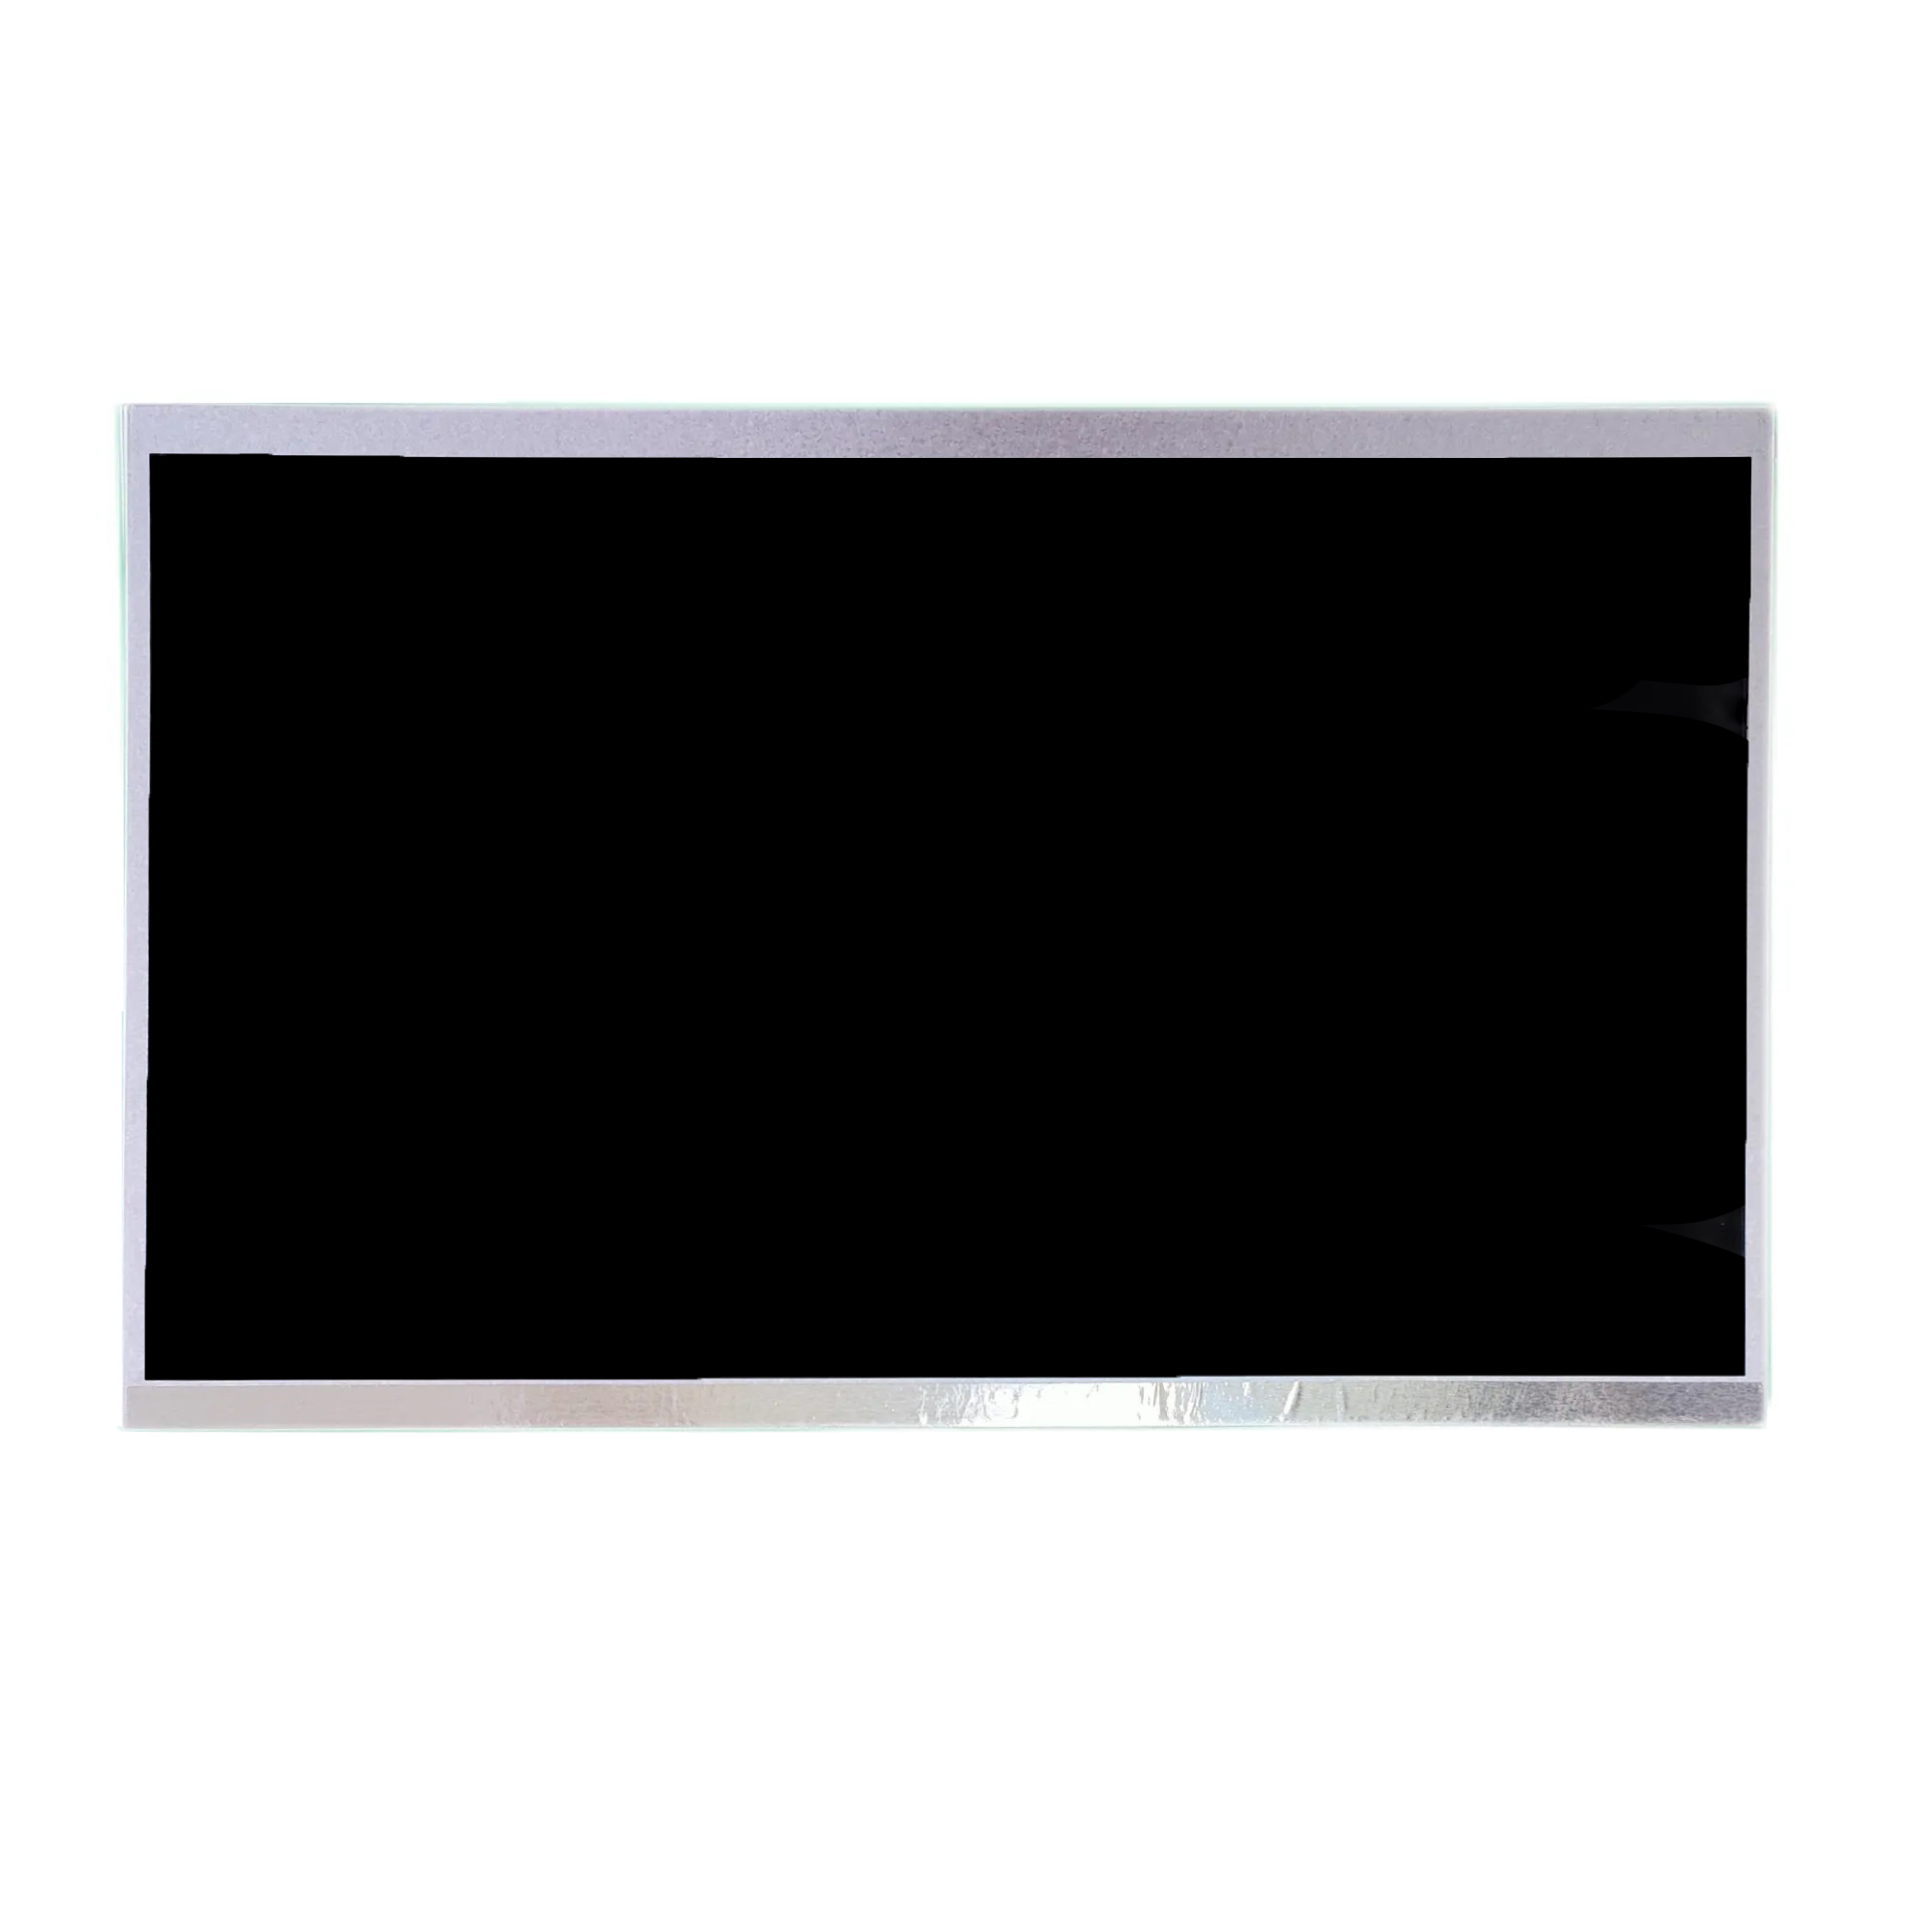 11.6 Inch 1920*1080 Pixel eDP Interface 1000 nit TFT Active Matrix LCD  for DVD/MID Digital Multi-Media and NetBook, UMPC, Small Computer